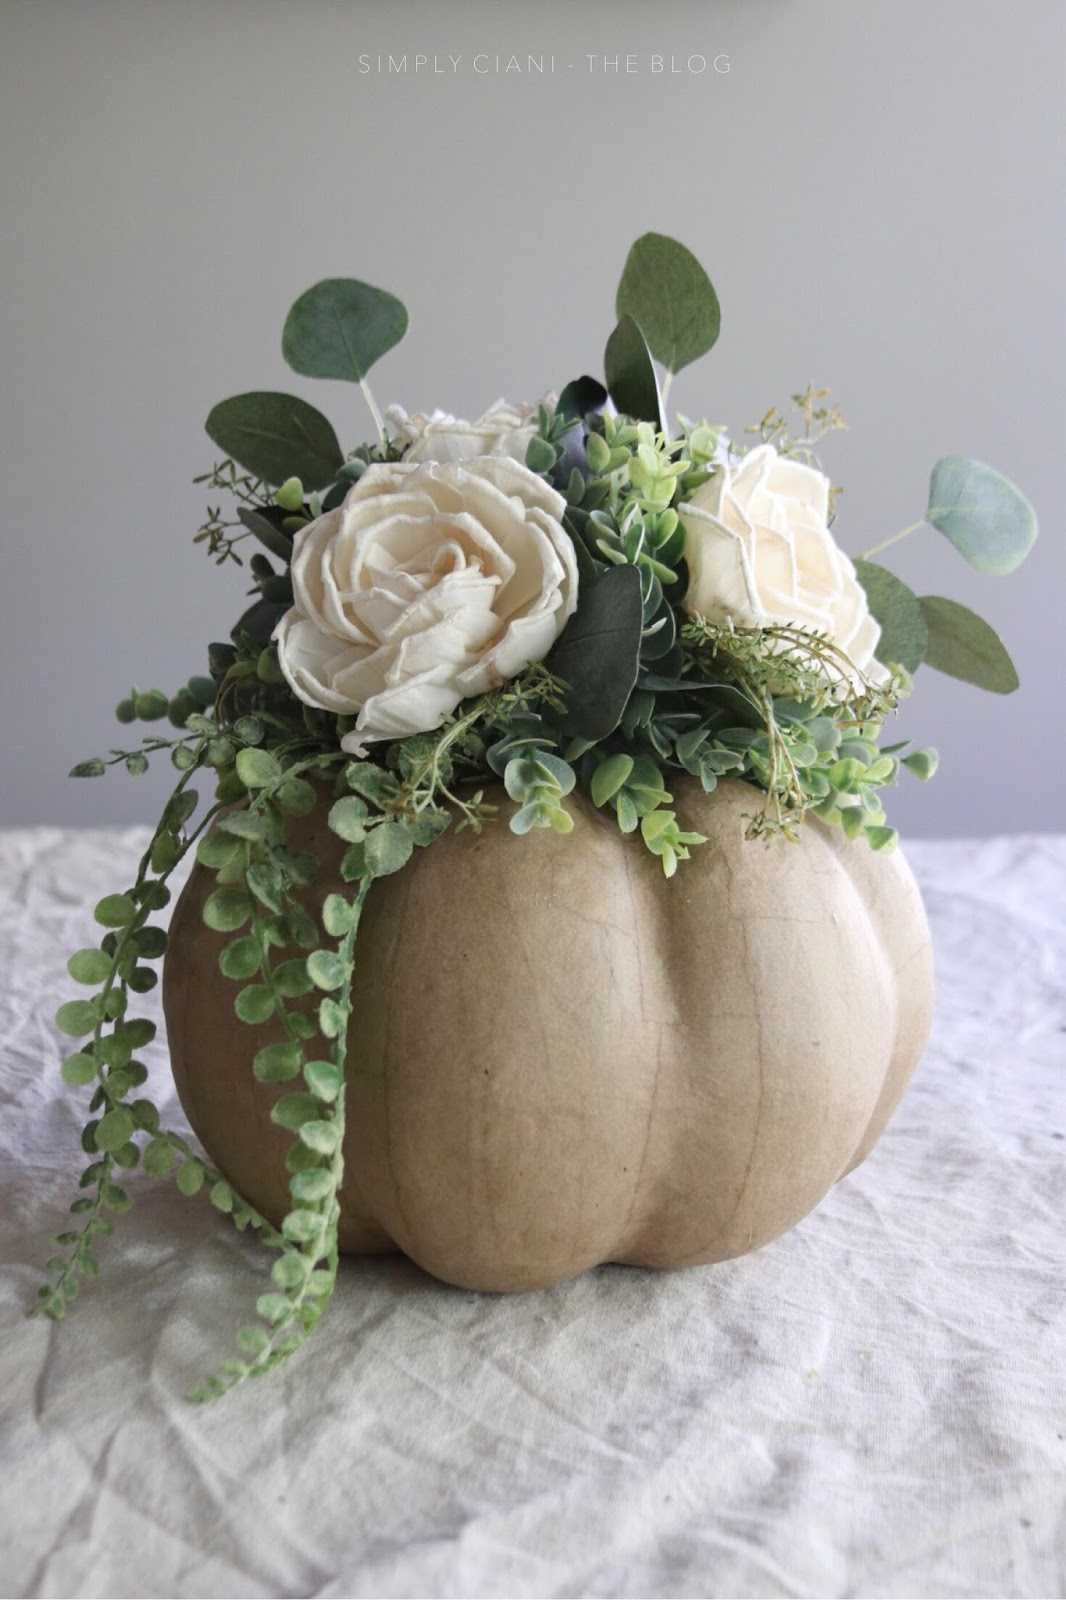 DIY craft pumpkin centerpiece with neutral blooms and greenery